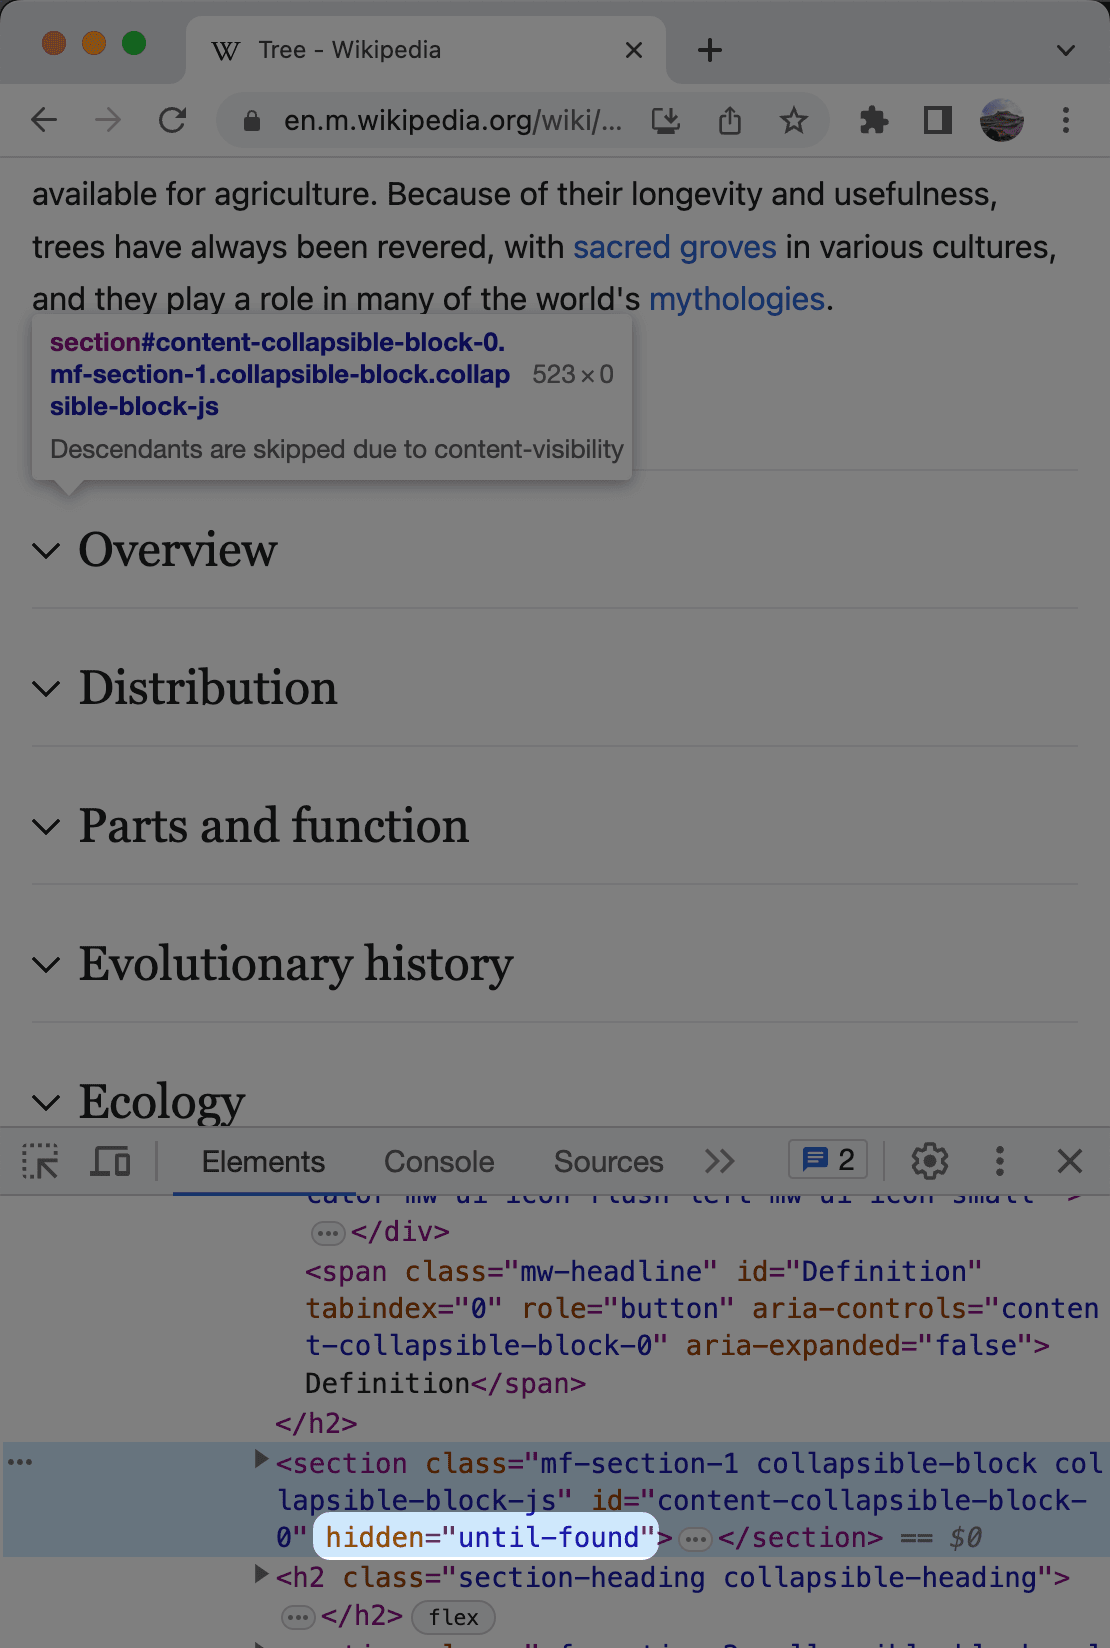 Screenshot of Wikipedia's mobile site showing many collapsed article sections. Chrome DevTools shows that a "hidden=until-found" attribute hides most of the sections.